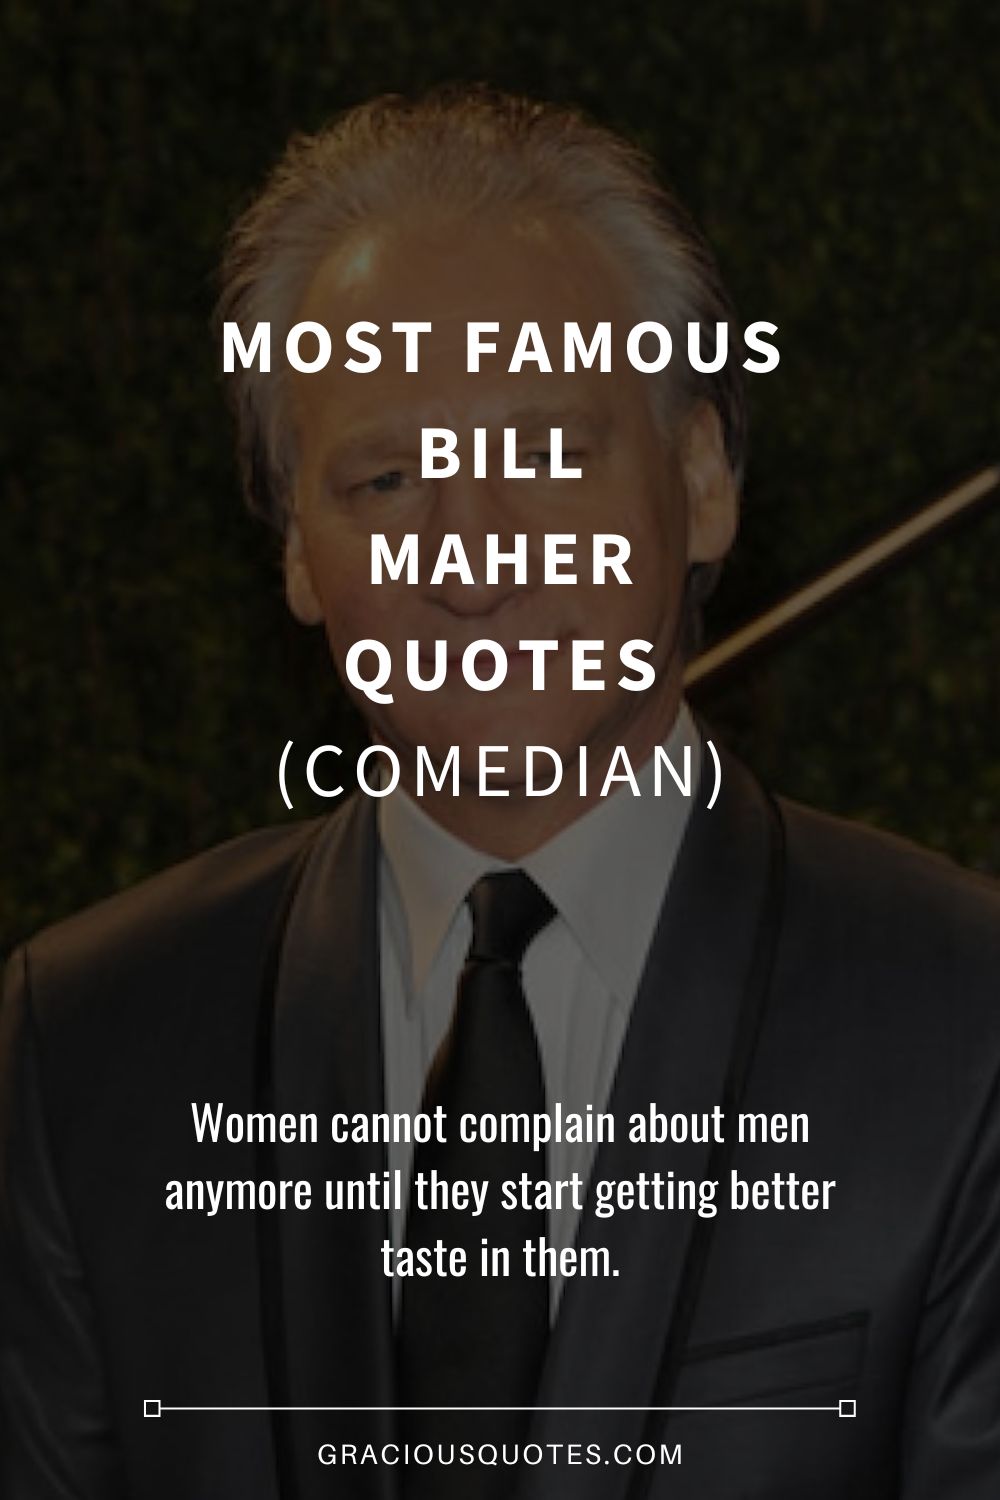 Most Famous Bill Maher Quotes (COMEDIAN) - Gracious Quotes